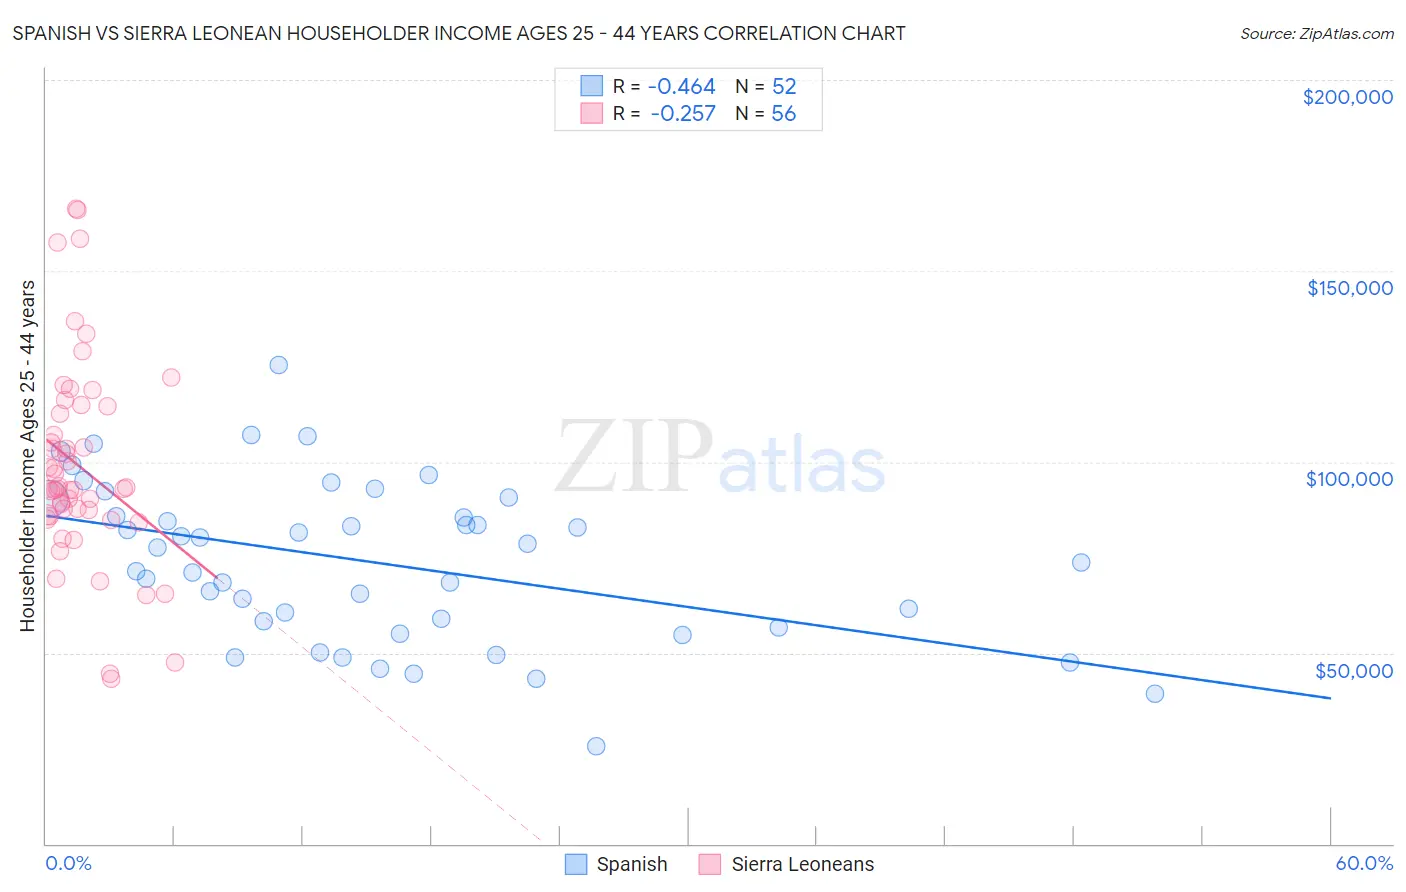 Spanish vs Sierra Leonean Householder Income Ages 25 - 44 years